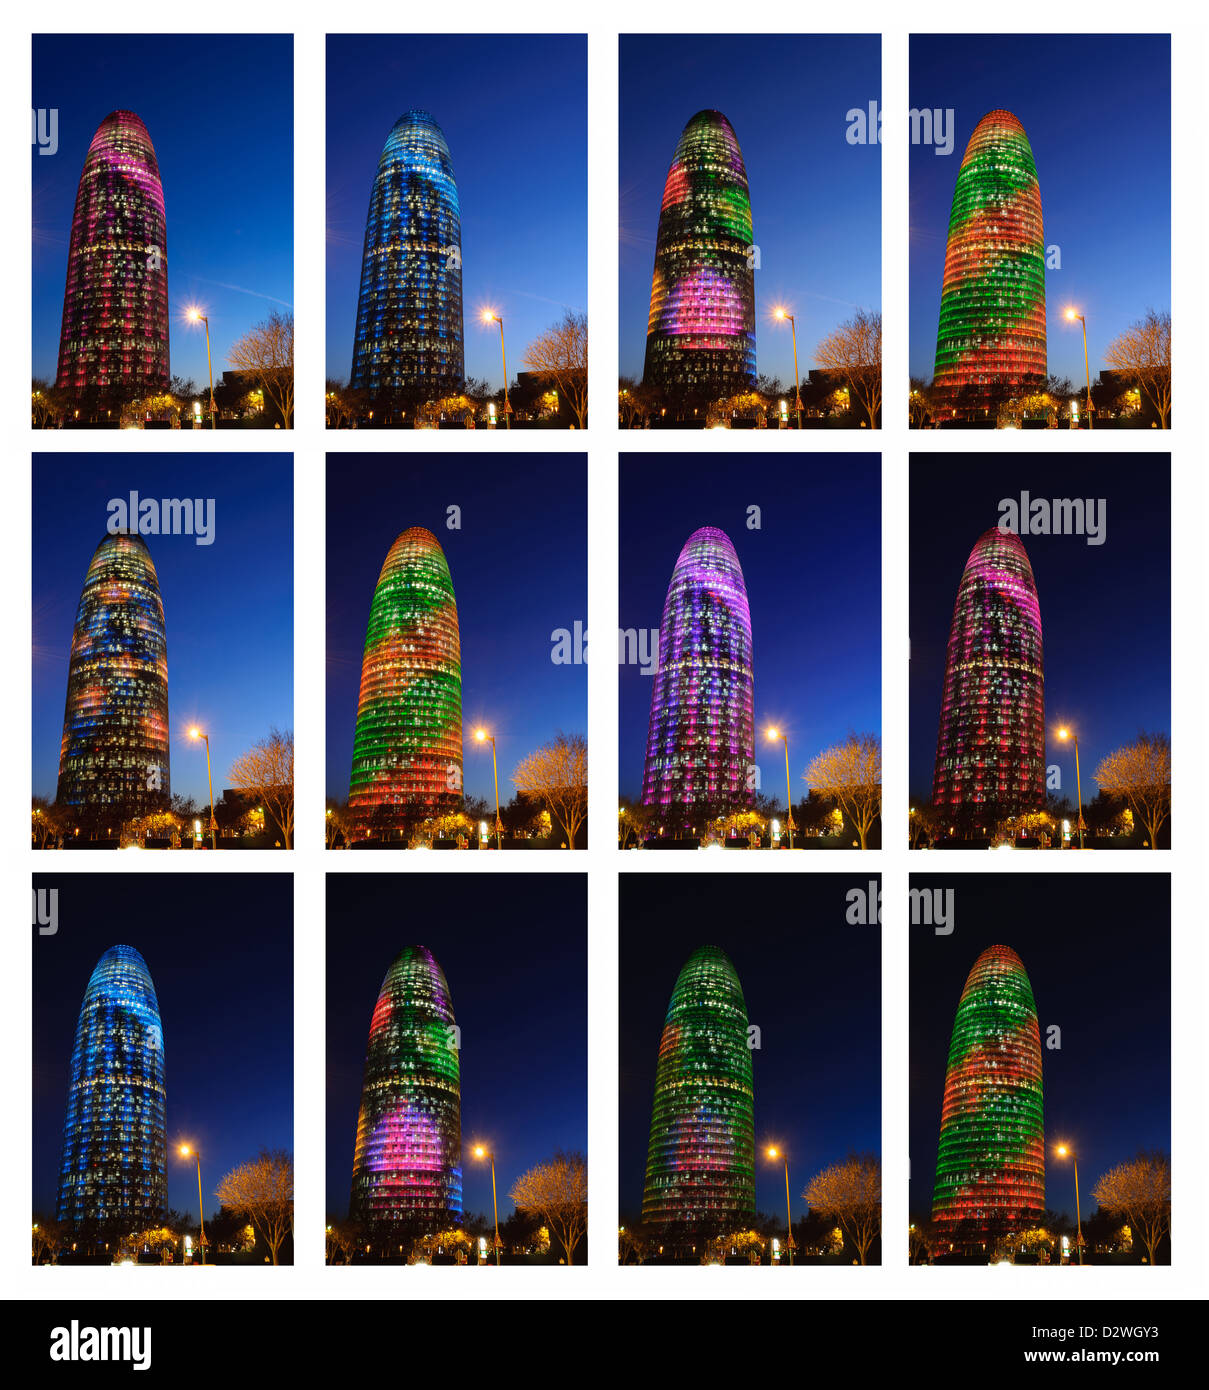 Collage of images of Torre Agbar illuminated at night with different colors. Barcelona, Spain. Stock Photo